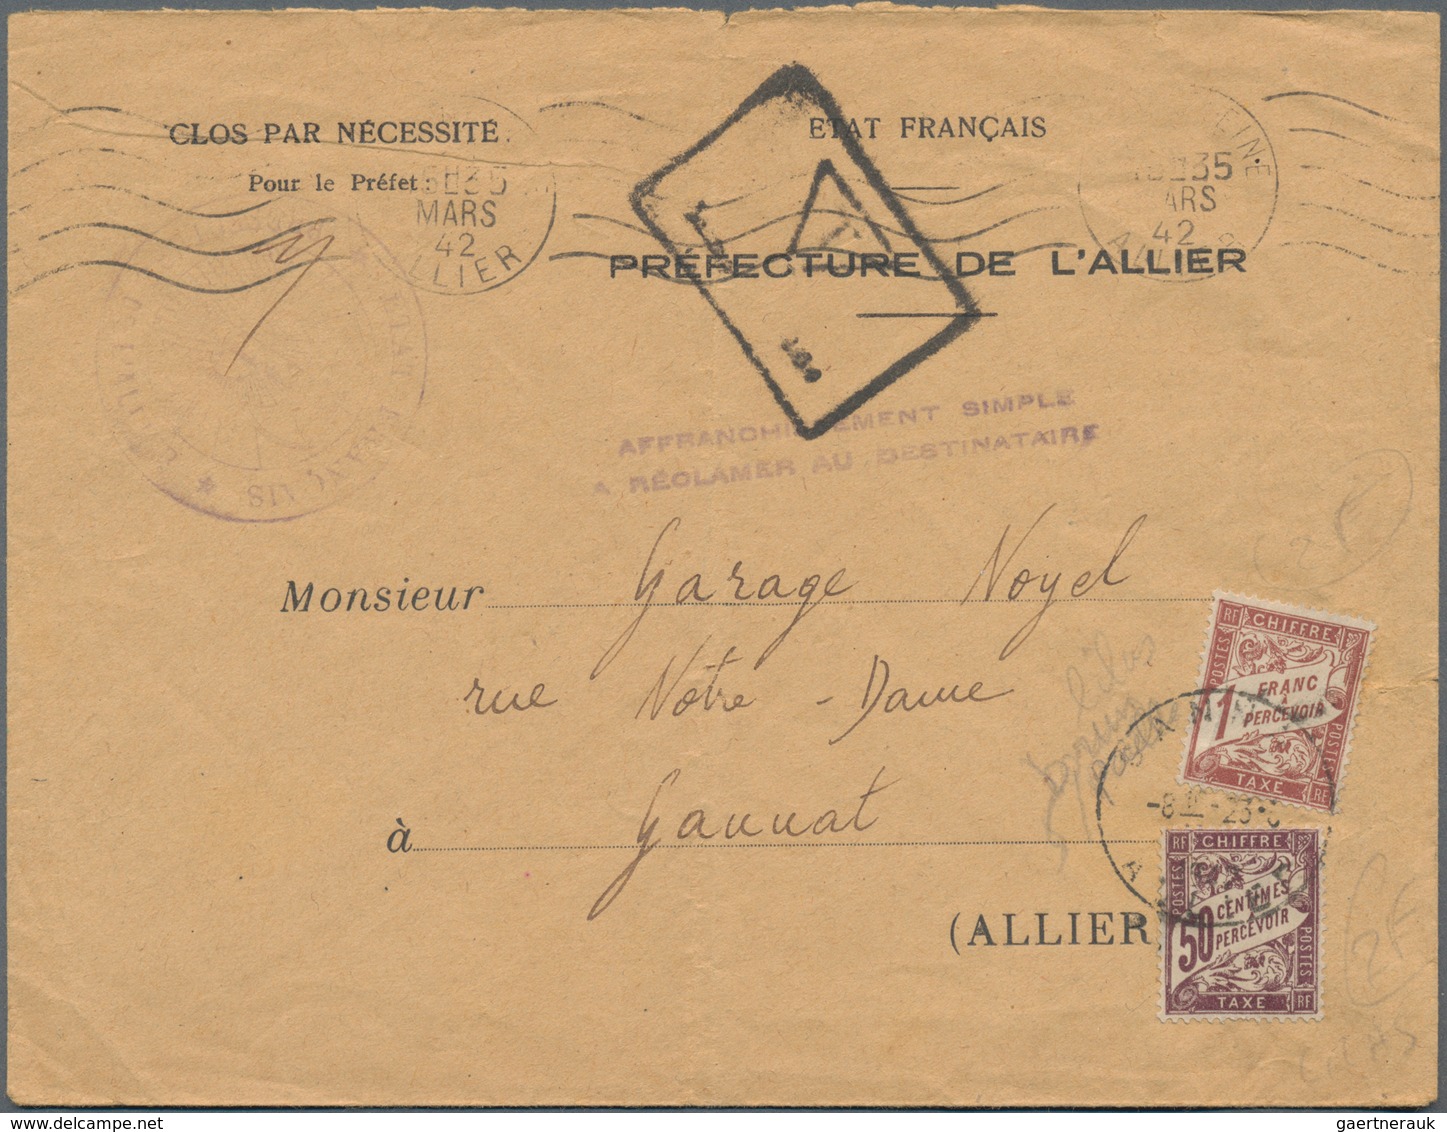 Frankreich: 1940/1945, fine accumulation of about 140 covers and cards many of them returned to send